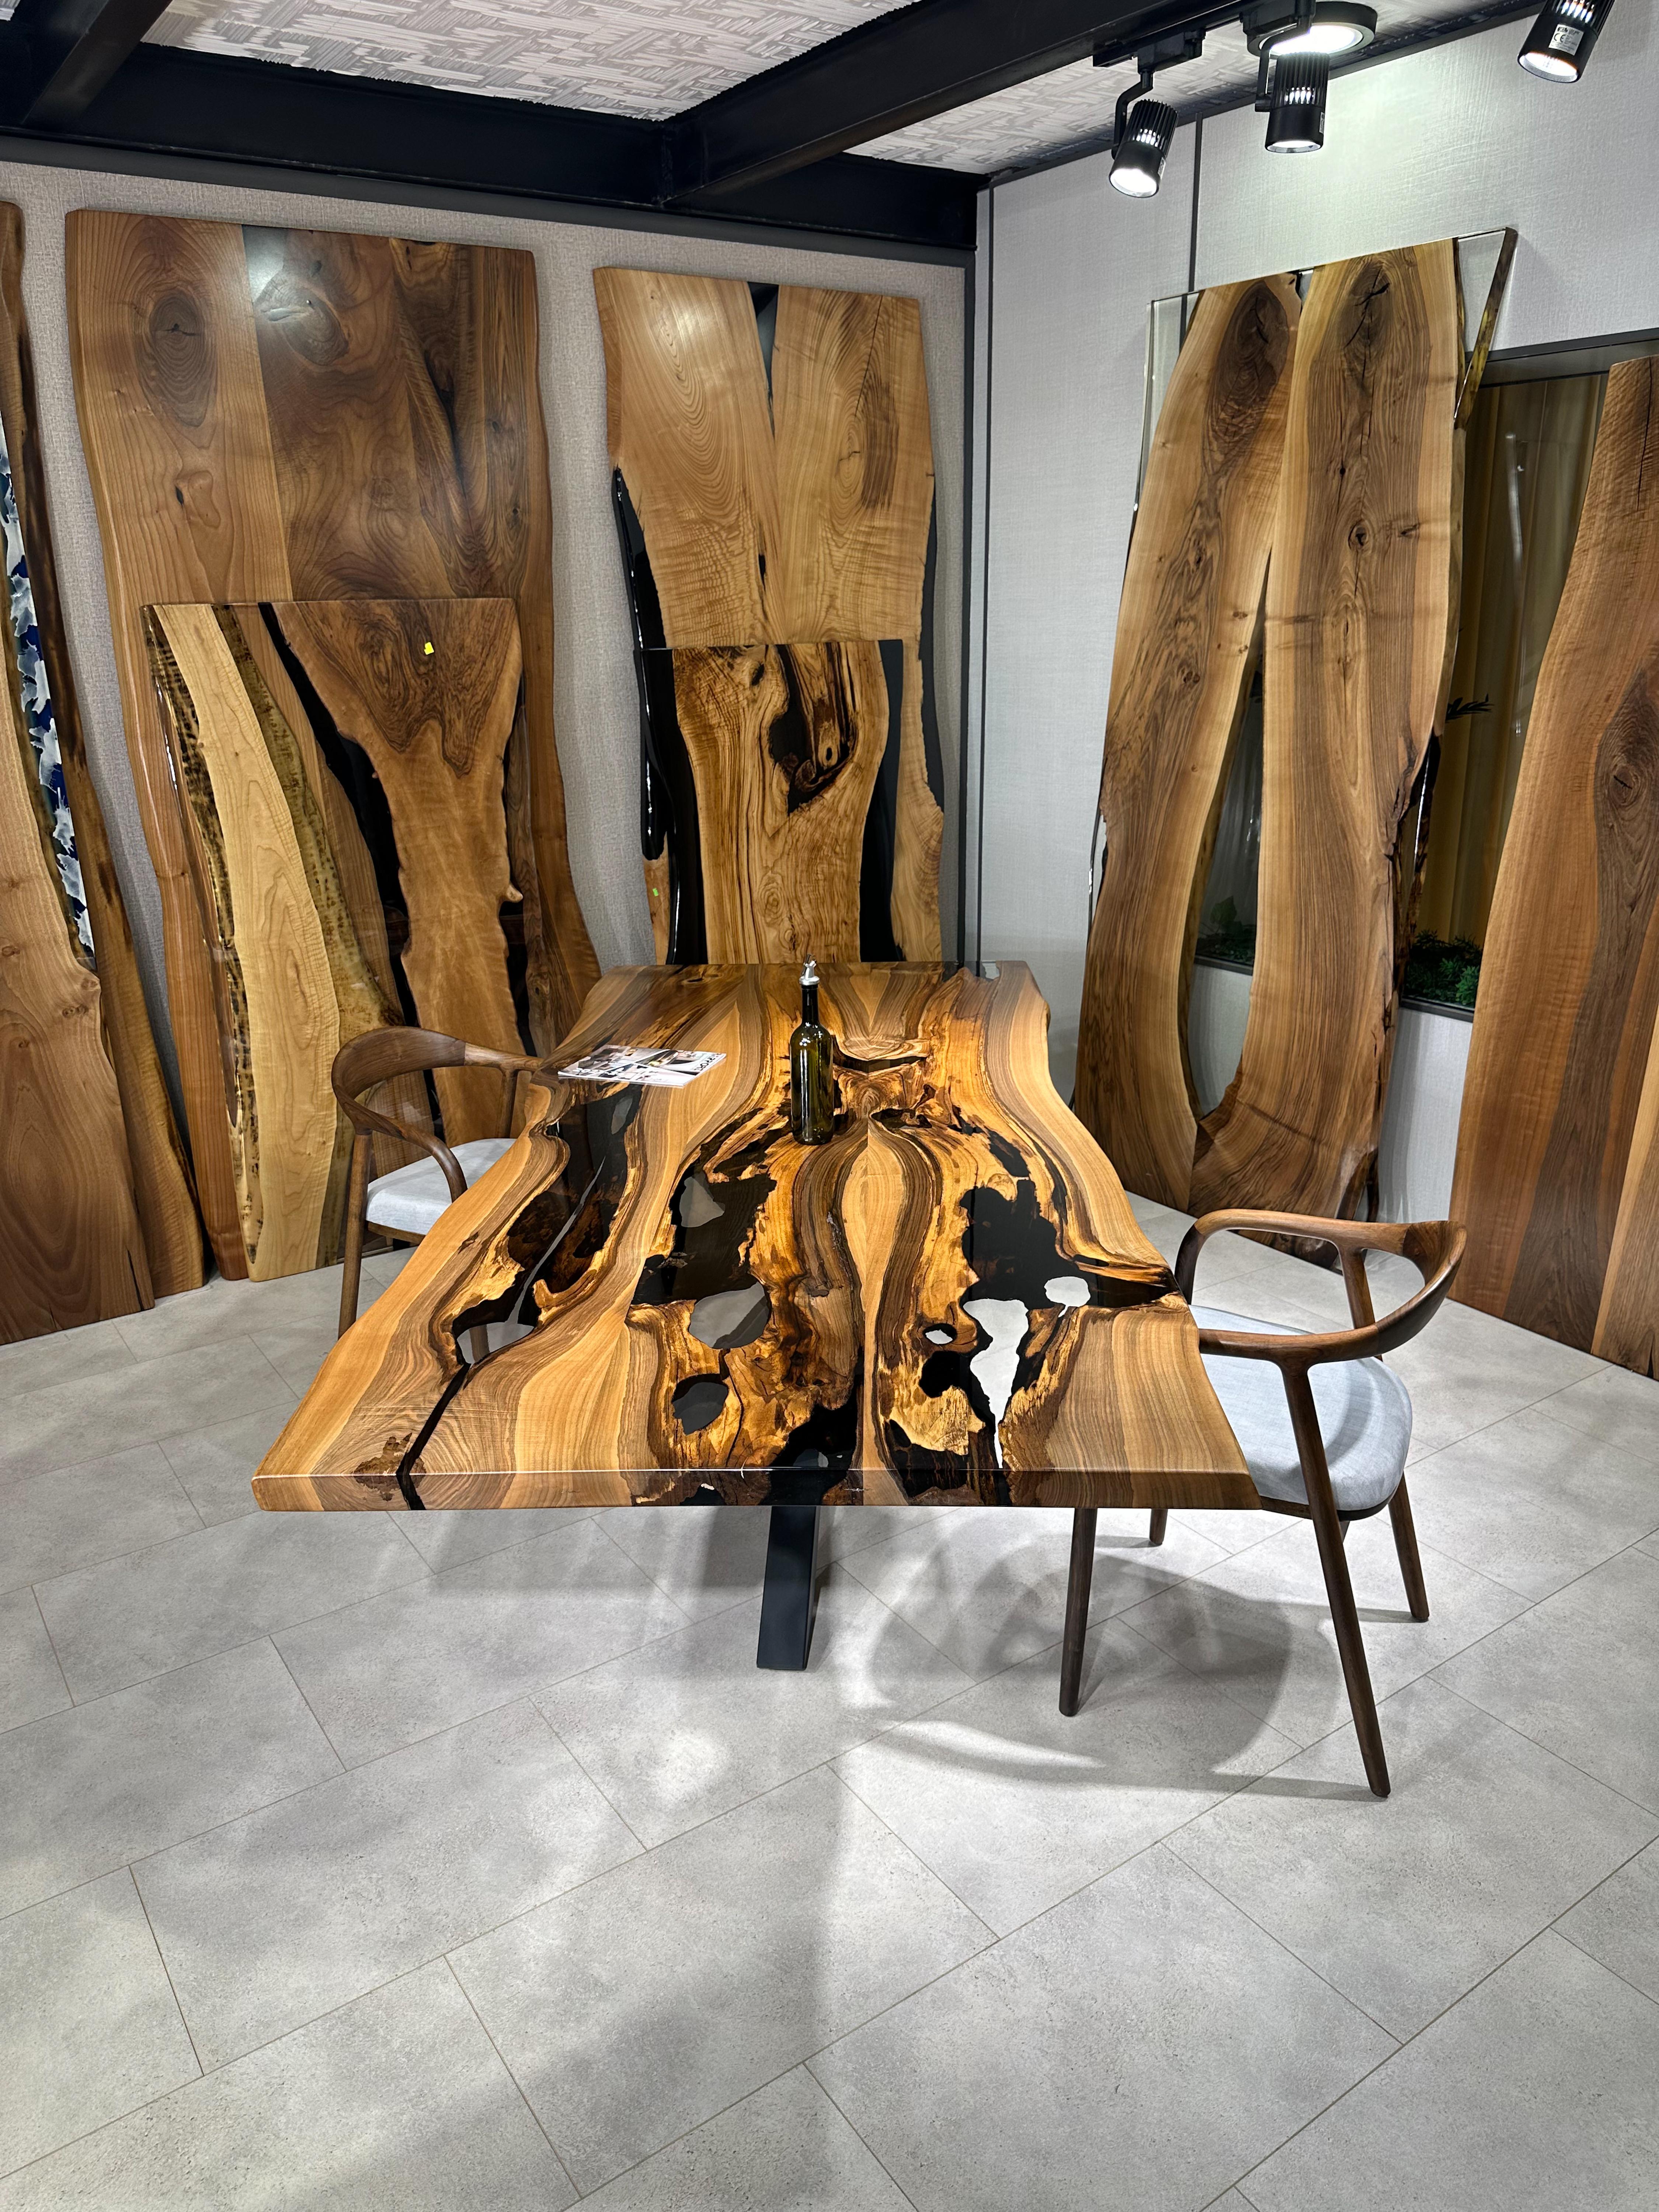 Walnut Live Edge Clear Epoxy Resin Dining Table 

This table is made of 500 years old Walnut Wood. The grains and texture of the wood describe what a natural walnut woods looks like.
It can be used as a dining table or as a conference table.